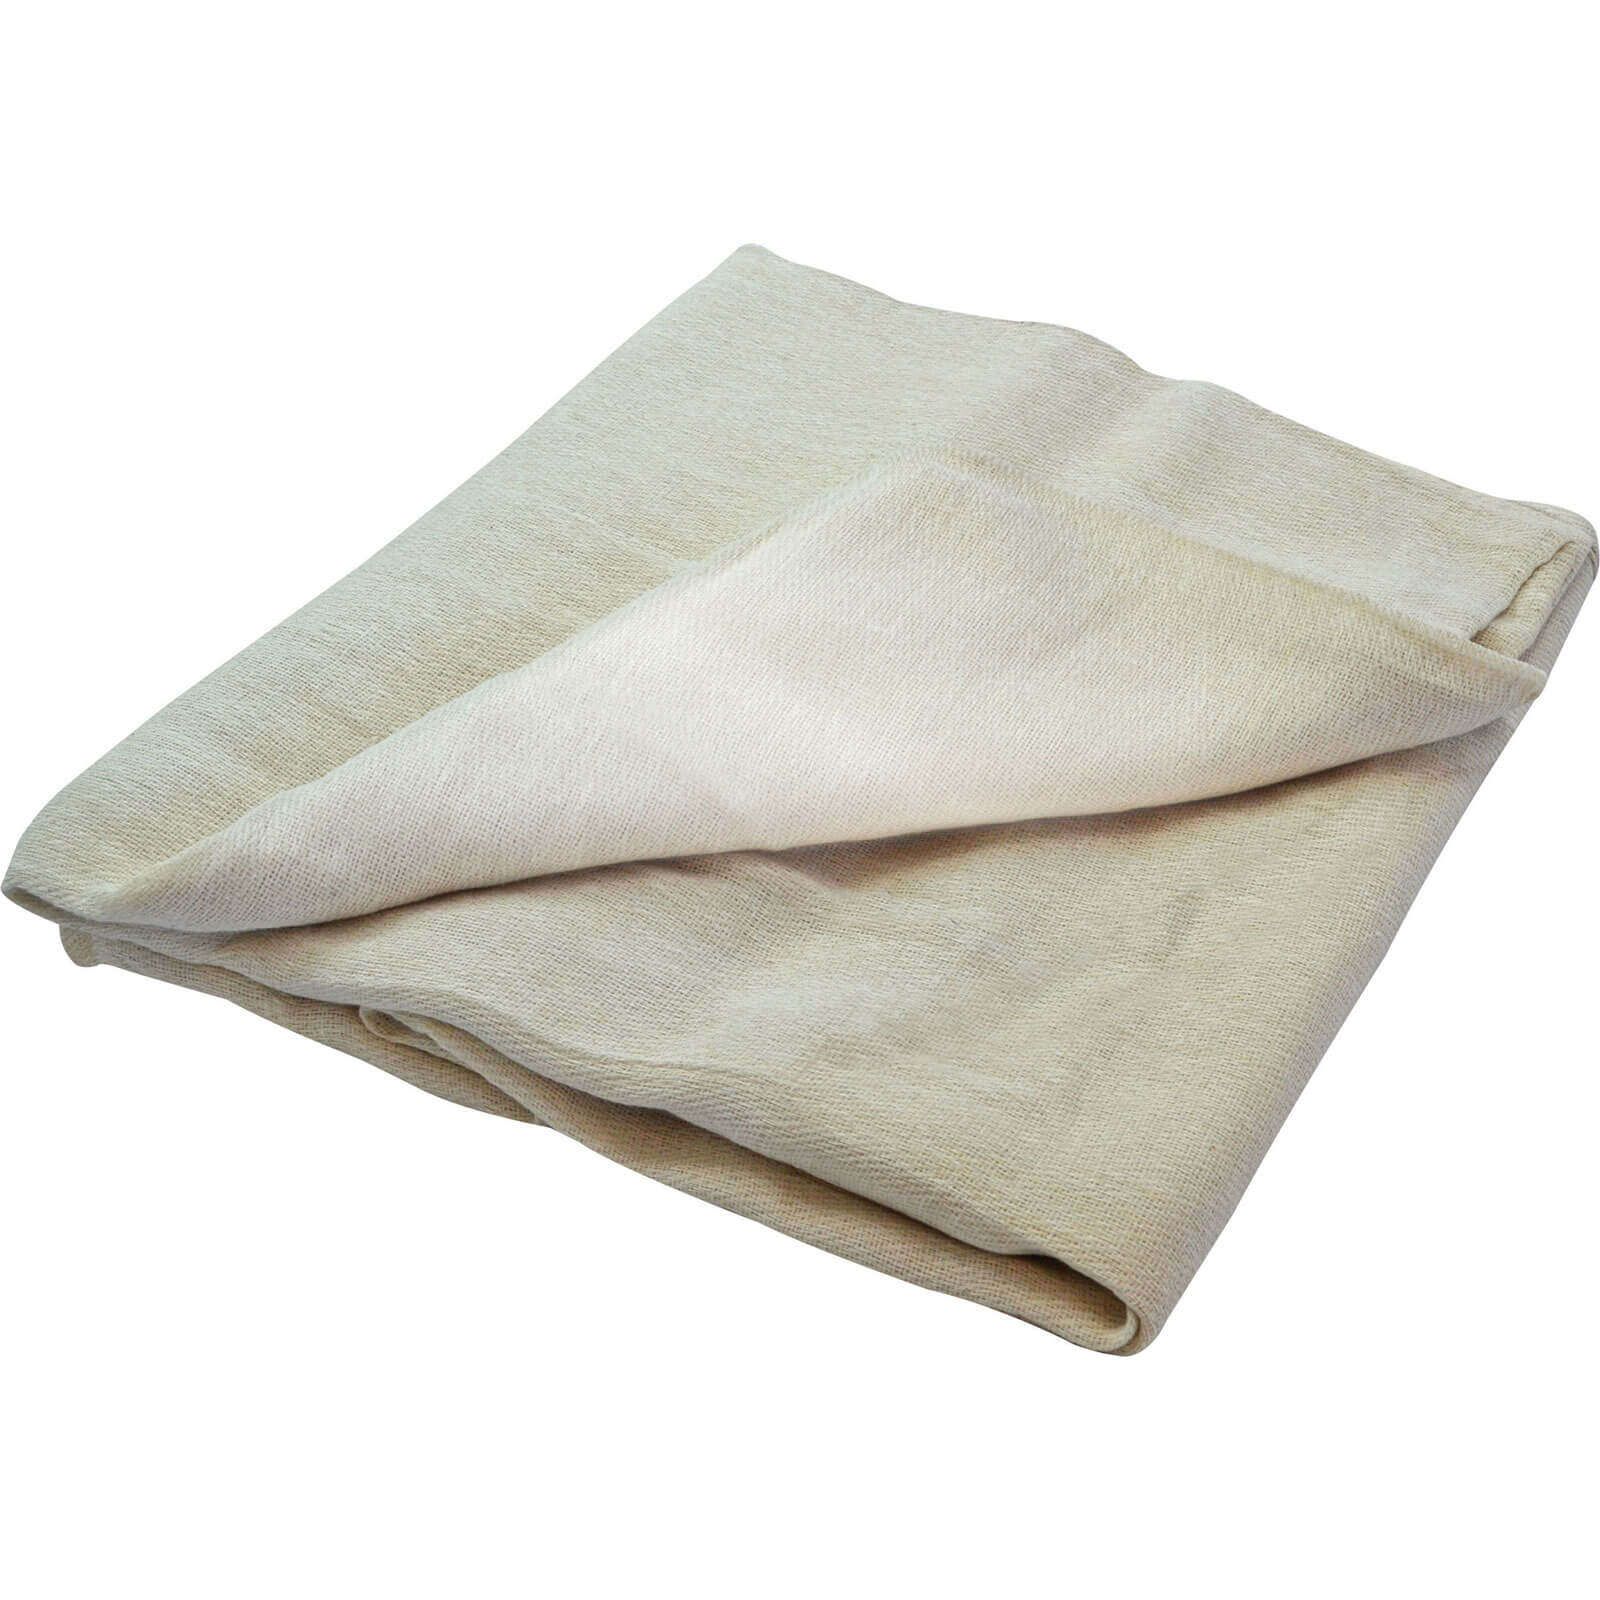 Image of Faithfull Dust Sheet Cotton Twill Poly Coated 3.7m 2.4mm Pack of 1